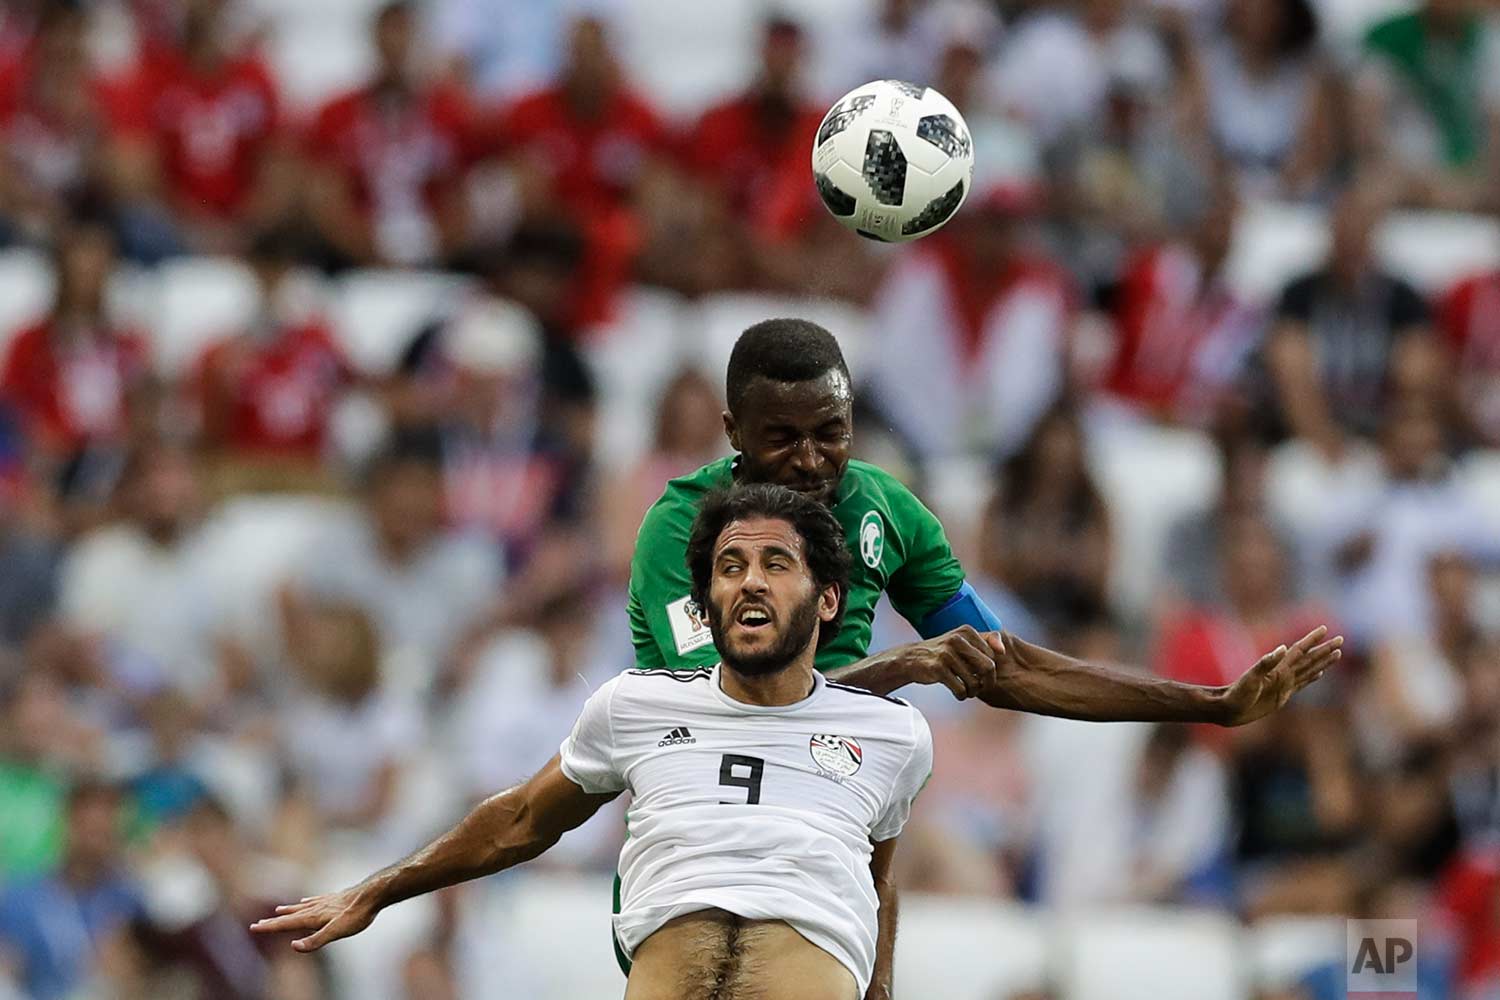  Egypt's Marwan Mohsen, front, and Saudi Arabia's Osama Hawsawi jump for the ball during the group A match between Saudi Arabia and Egypt at the 2018 soccer World Cup at the Volgograd Arena in Volgograd, Russia, Monday, June 25, 2018. (AP Photo/Andre